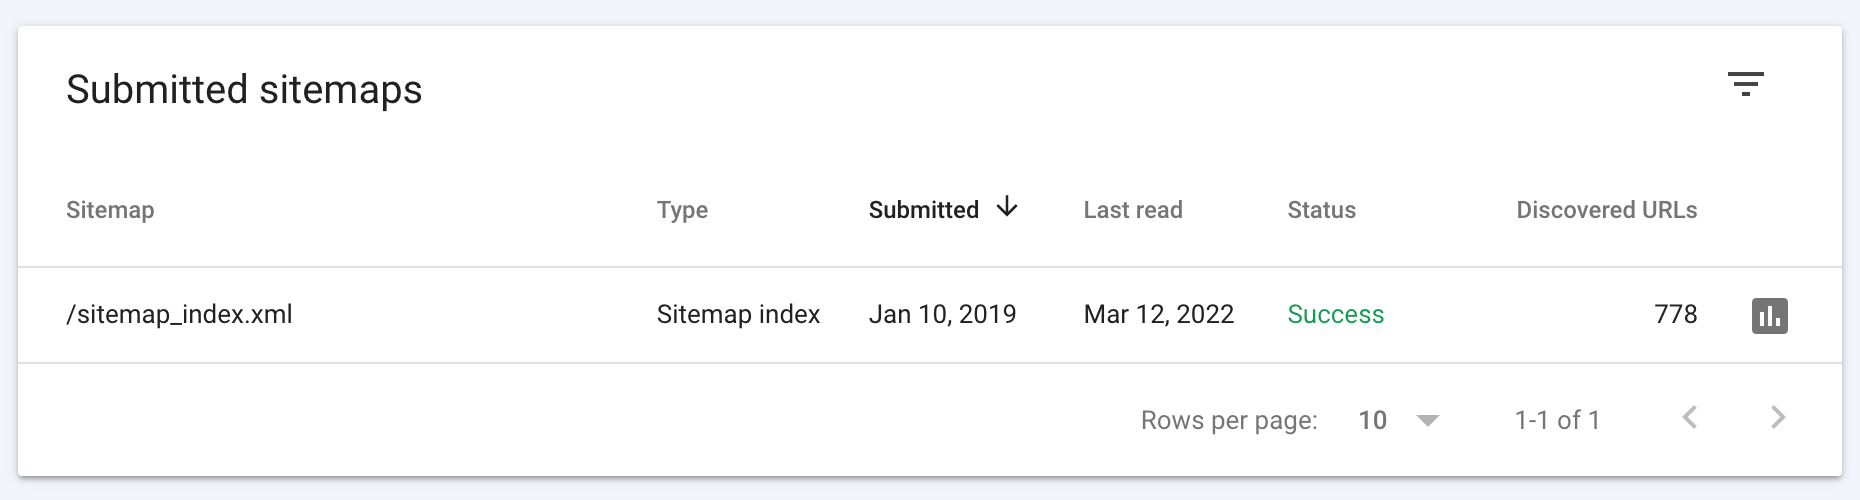 Google Search Console submitted sitemaps dashboard